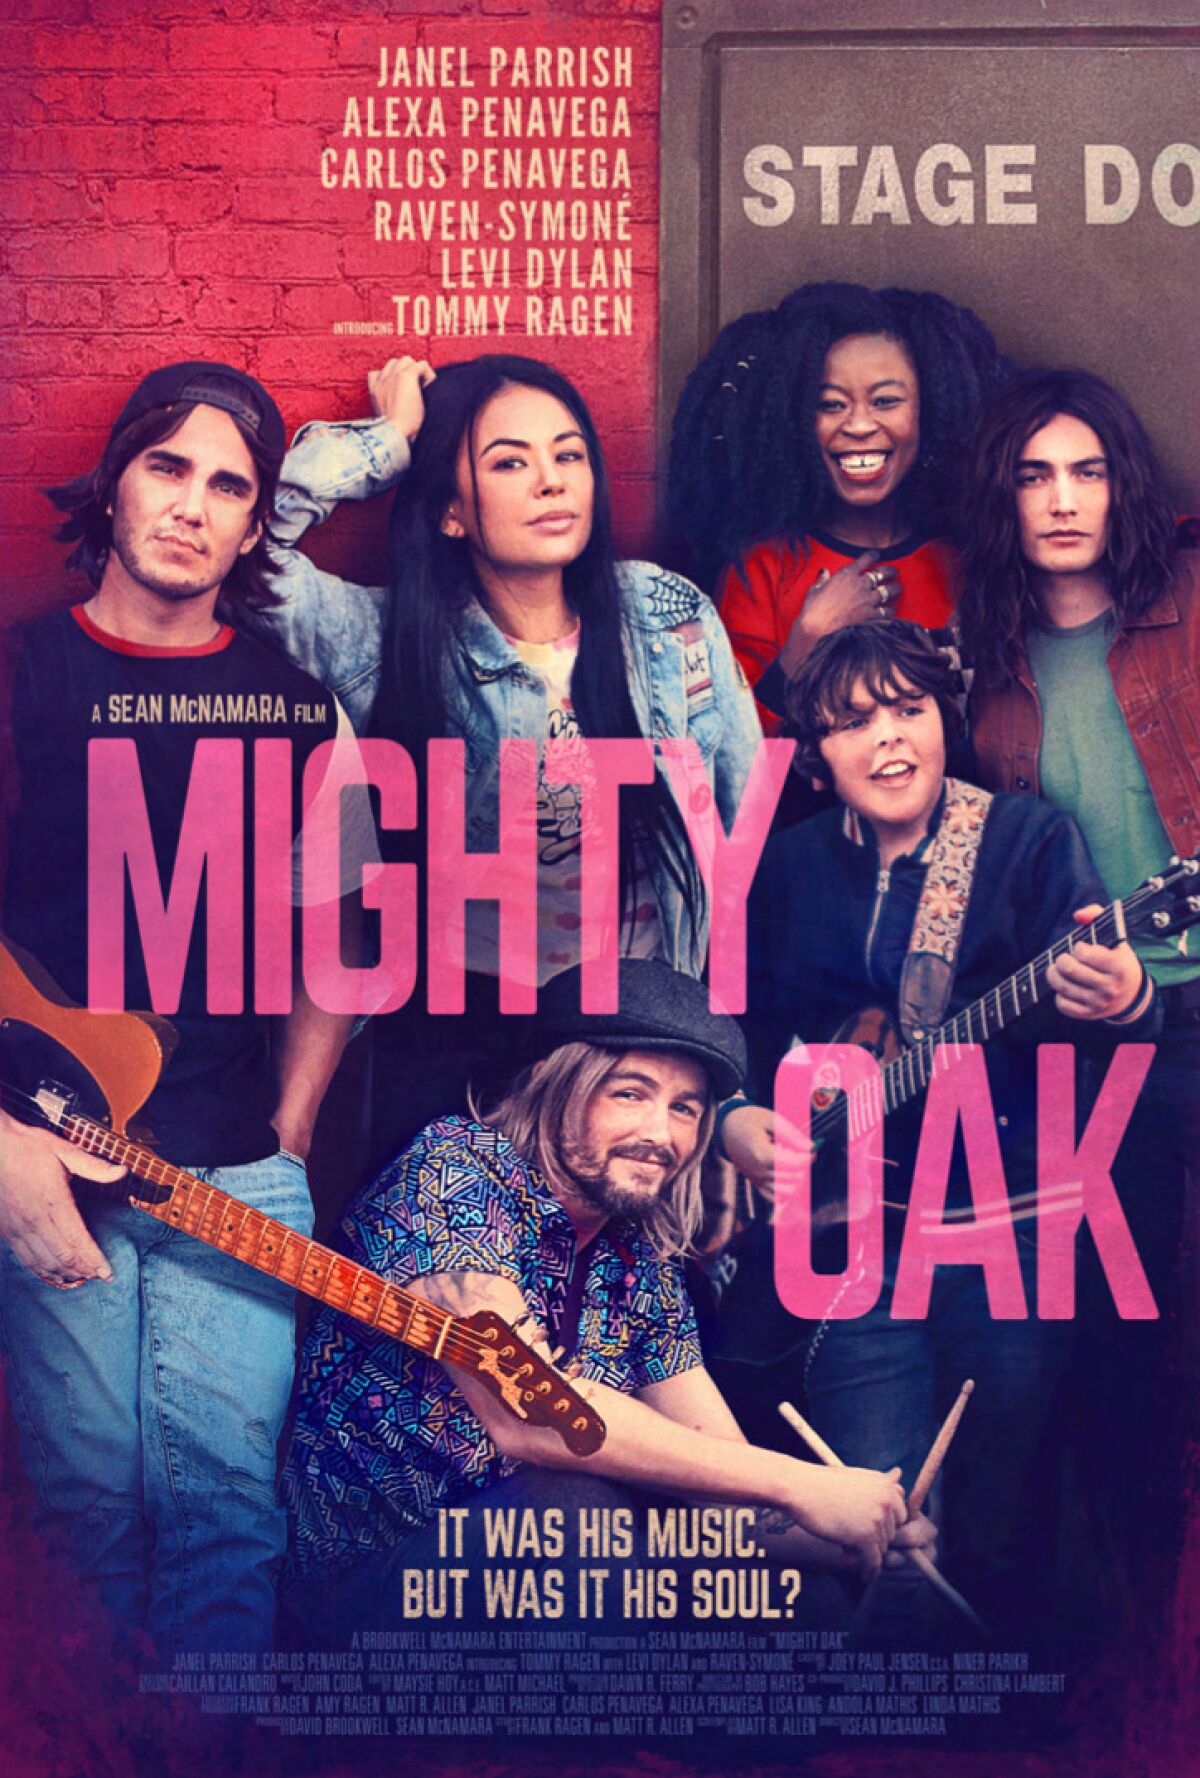 The poster for "Mighty Oak."